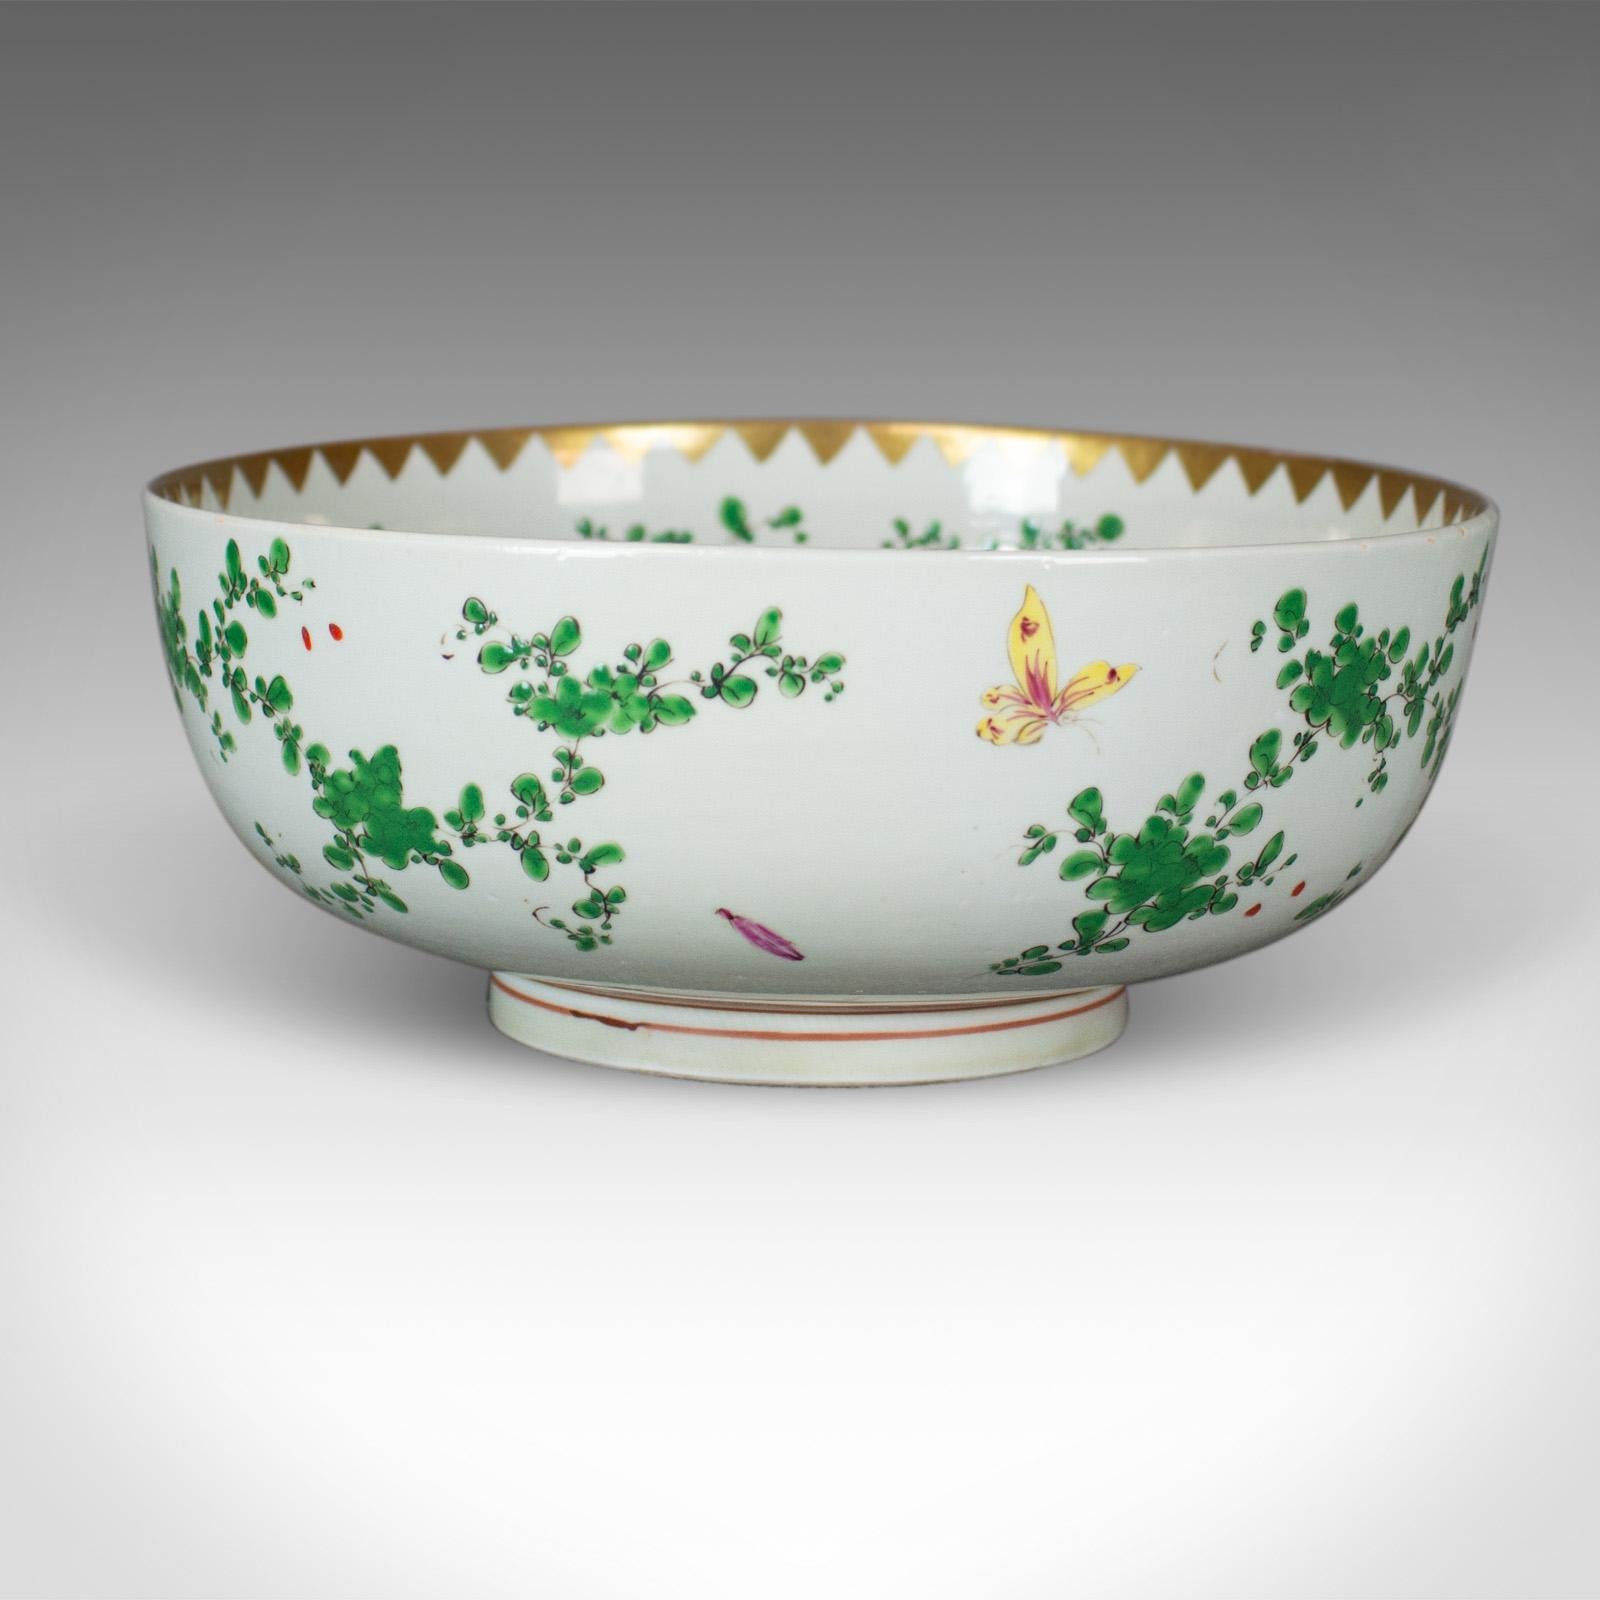 This is a large Chinese porcelain lychee bowl in natural tones on a white ground dating to the late 20th century.

An attractive bowl in good condition throughout
Painted with exotic birds, butterflies and foliage on a white ground
The inner rim